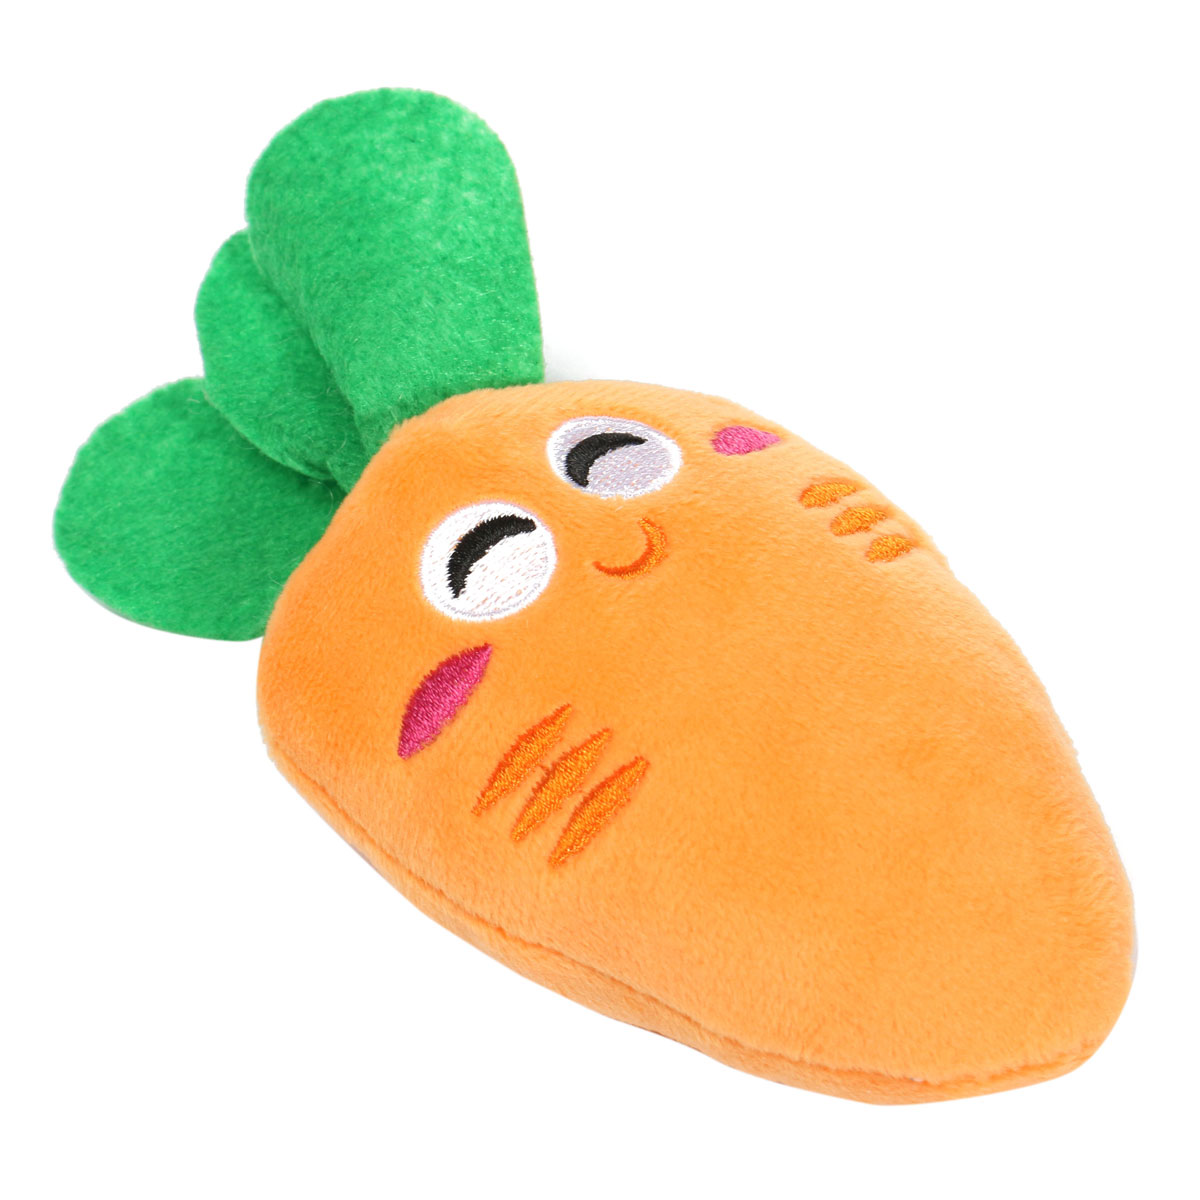 

Carrot Funny Puppy Sound Chew Squeaker Vegetable Cat Squeaky Plush Toys Pet Dog Gift